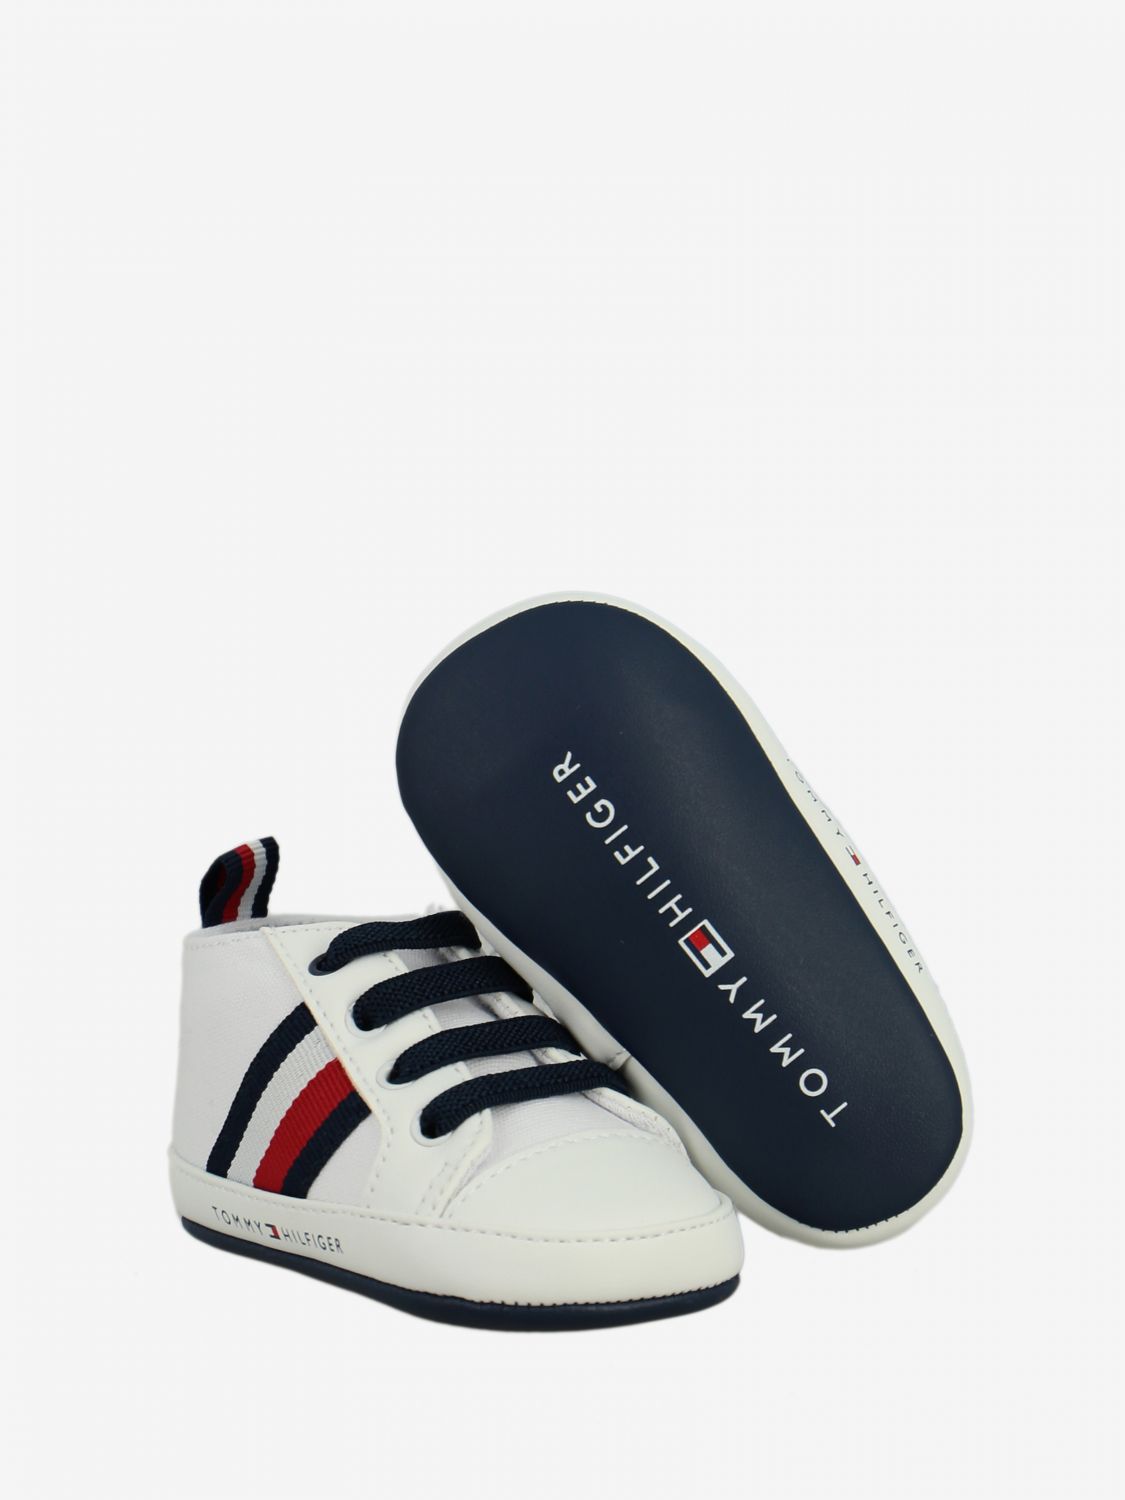 tommy hilfiger youth shoes